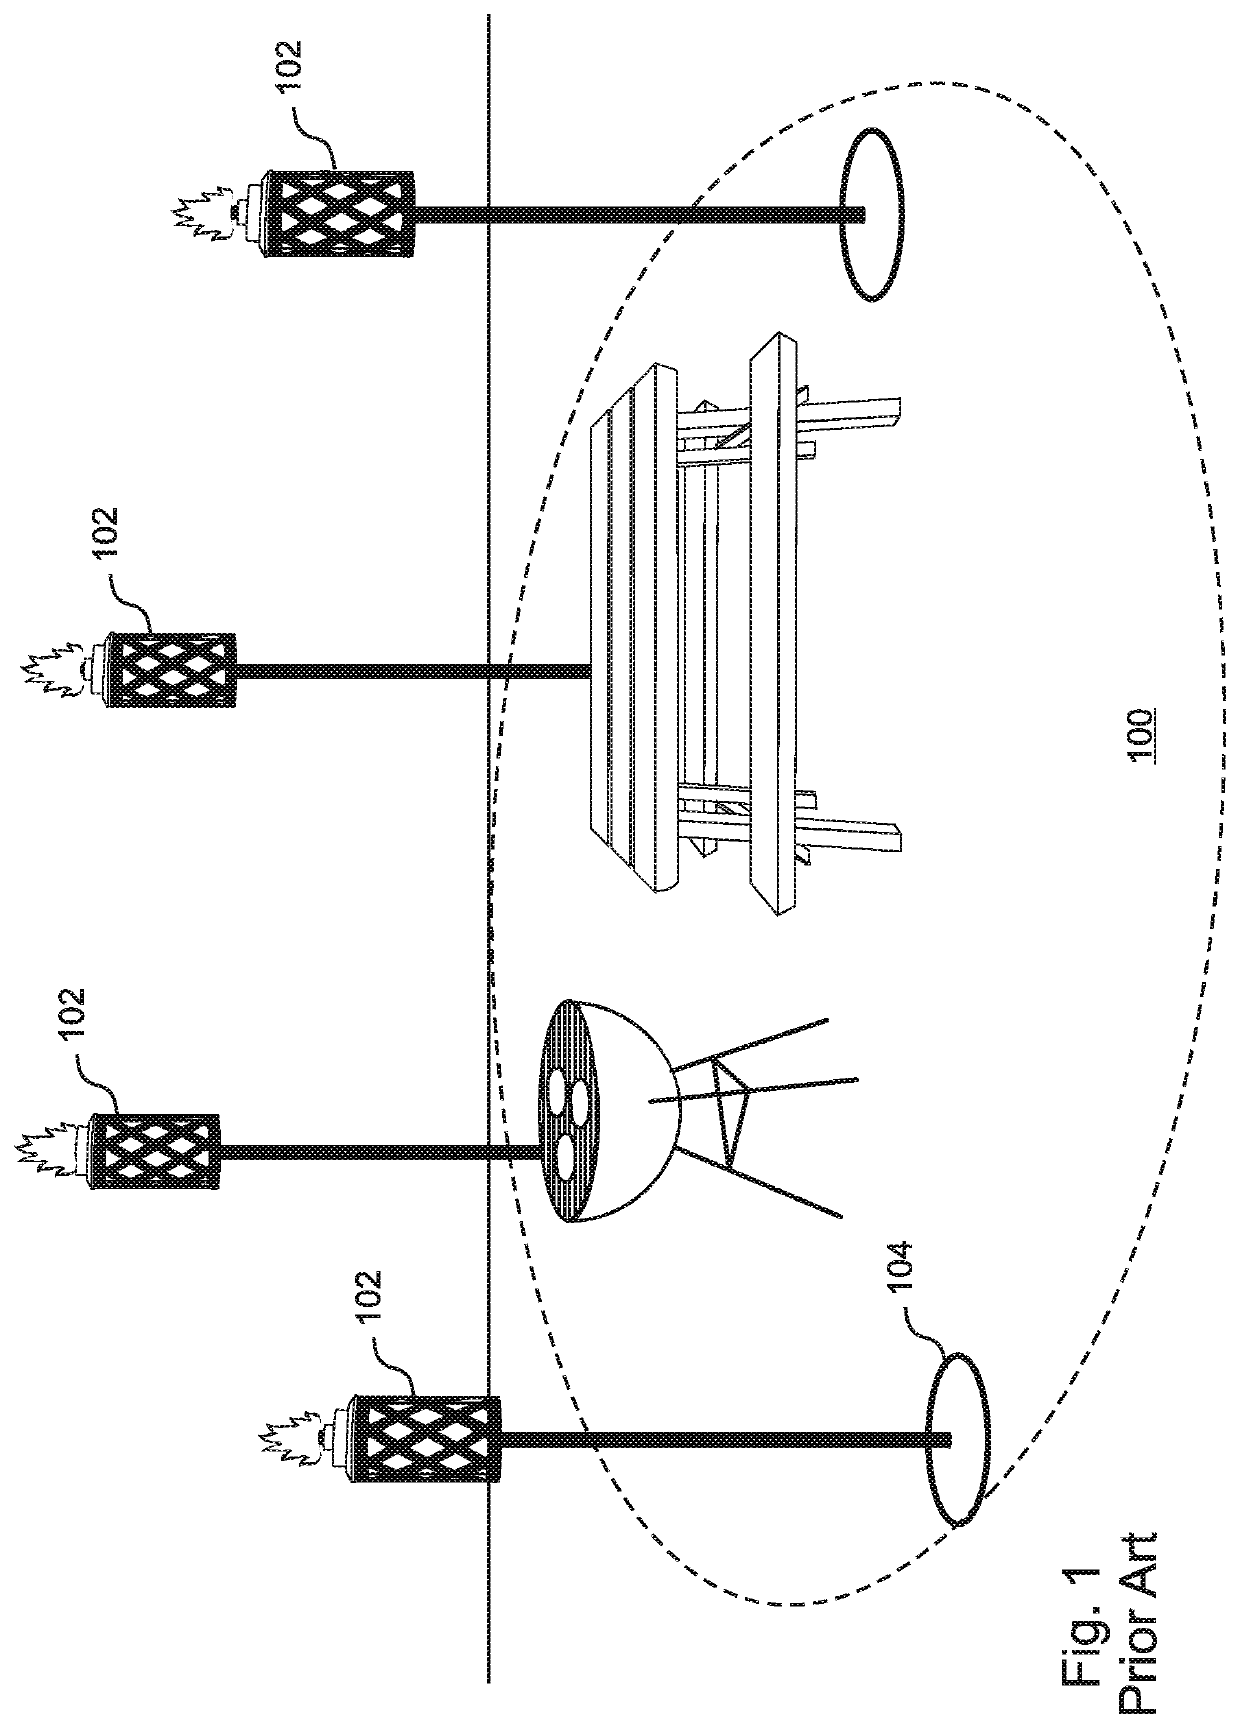 Insect repellent torch system with automatic fuel replenishment